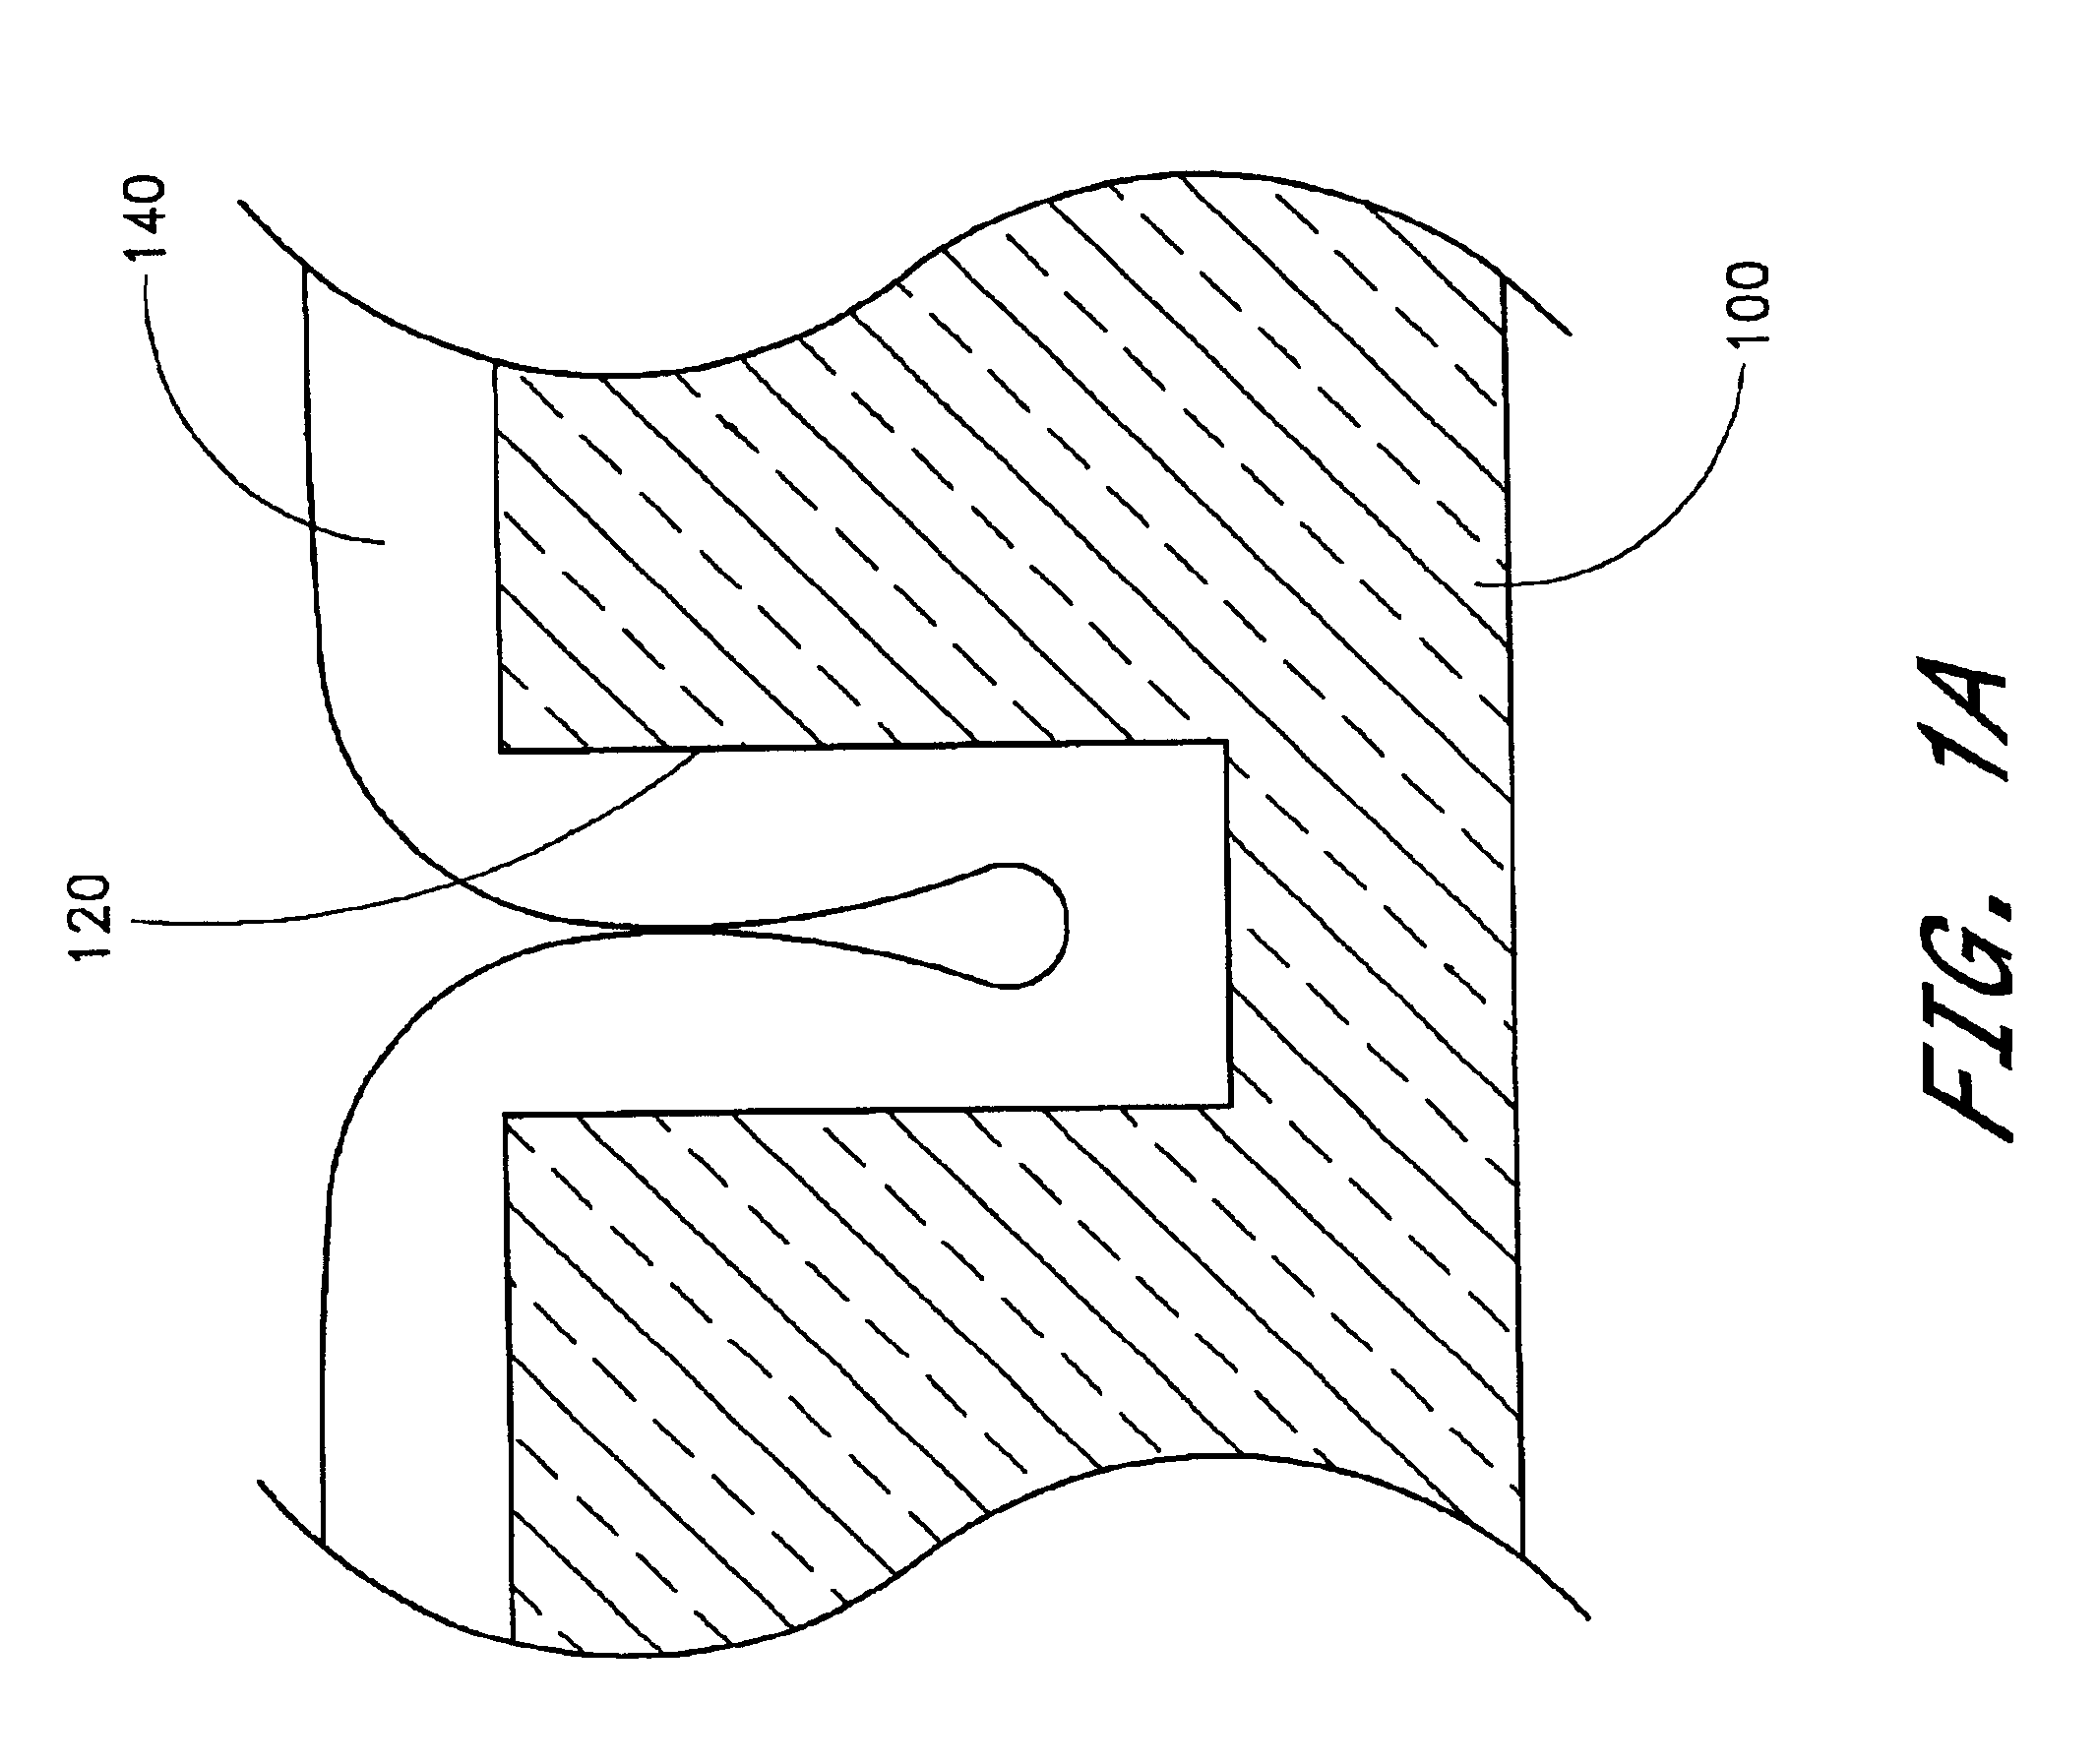 Method of fabricating trench isolation structures for integrated circuits using atomic layer deposition